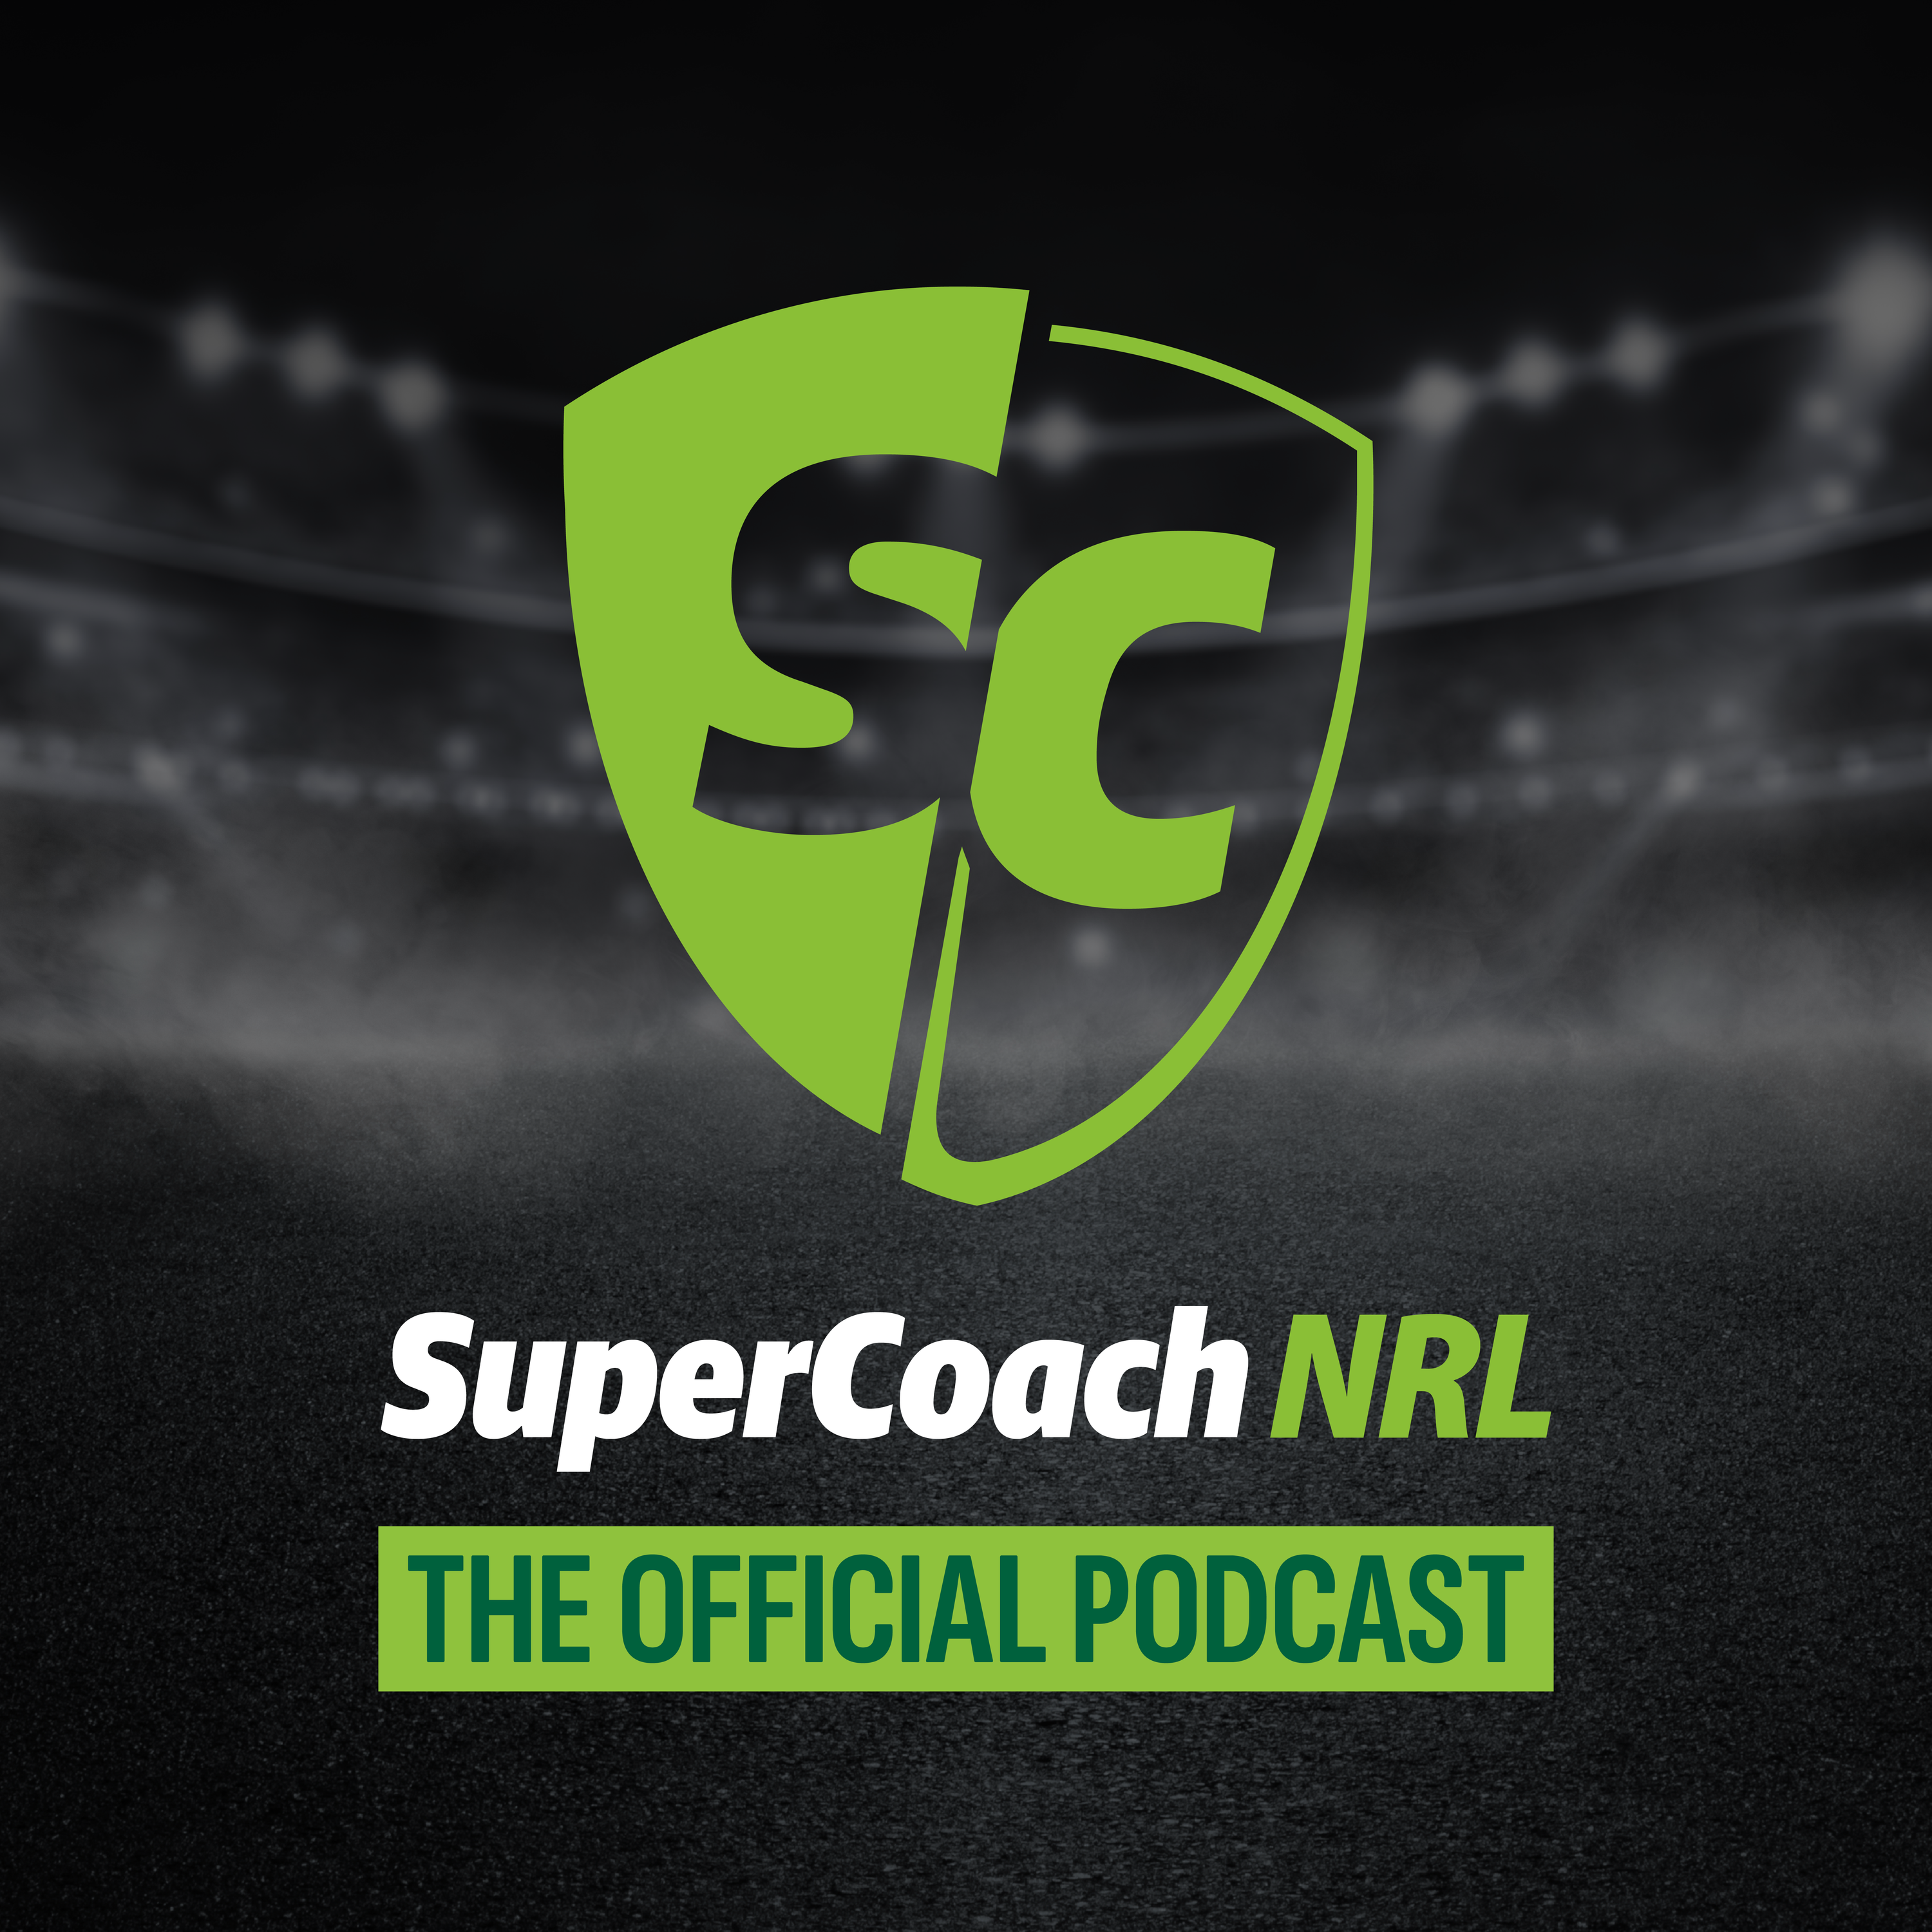 NRL SuperCoach podcast: Round 9 preview